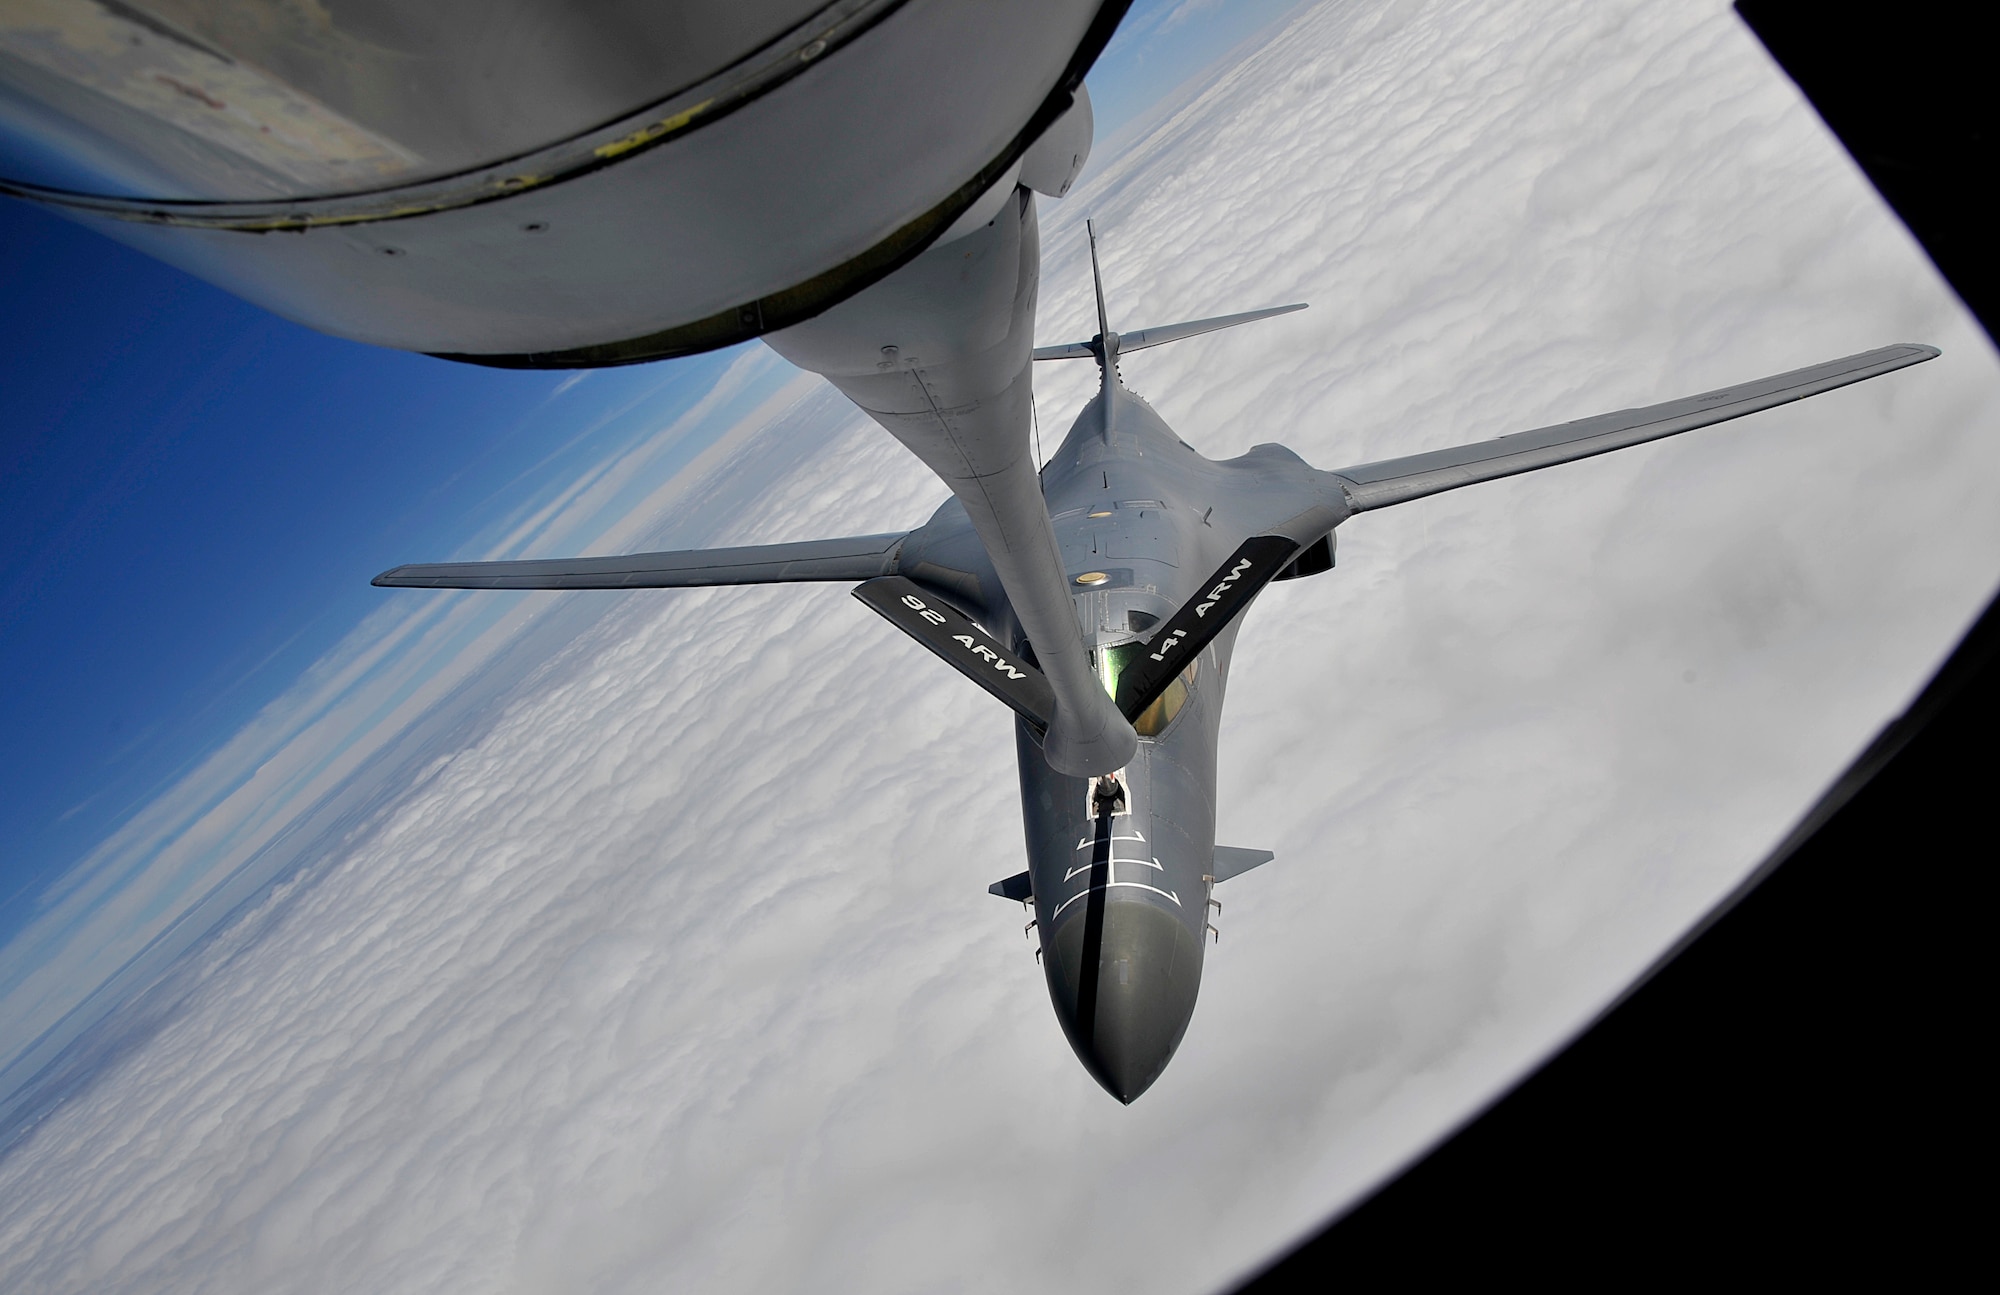 A KC-135 Stratotanker from Fairchild Air Force Base refuels a B-1B Lancer during a training exercise Sept. 23, 2014, over South Dakota. For more than 50 years the KC-135 has provided the core aerial refueling capability for the Air Force. The aircraft can travel up to 1,500 miles with 150,000 pounds of transfer fuel, which enables the Air Force to project rapid, flexible military power. The B-1B is assigned to Ellsworth Air Force Base, South Dakota. (U.S. Air Force photo by Senior Airman Mary O'Dell/Released)